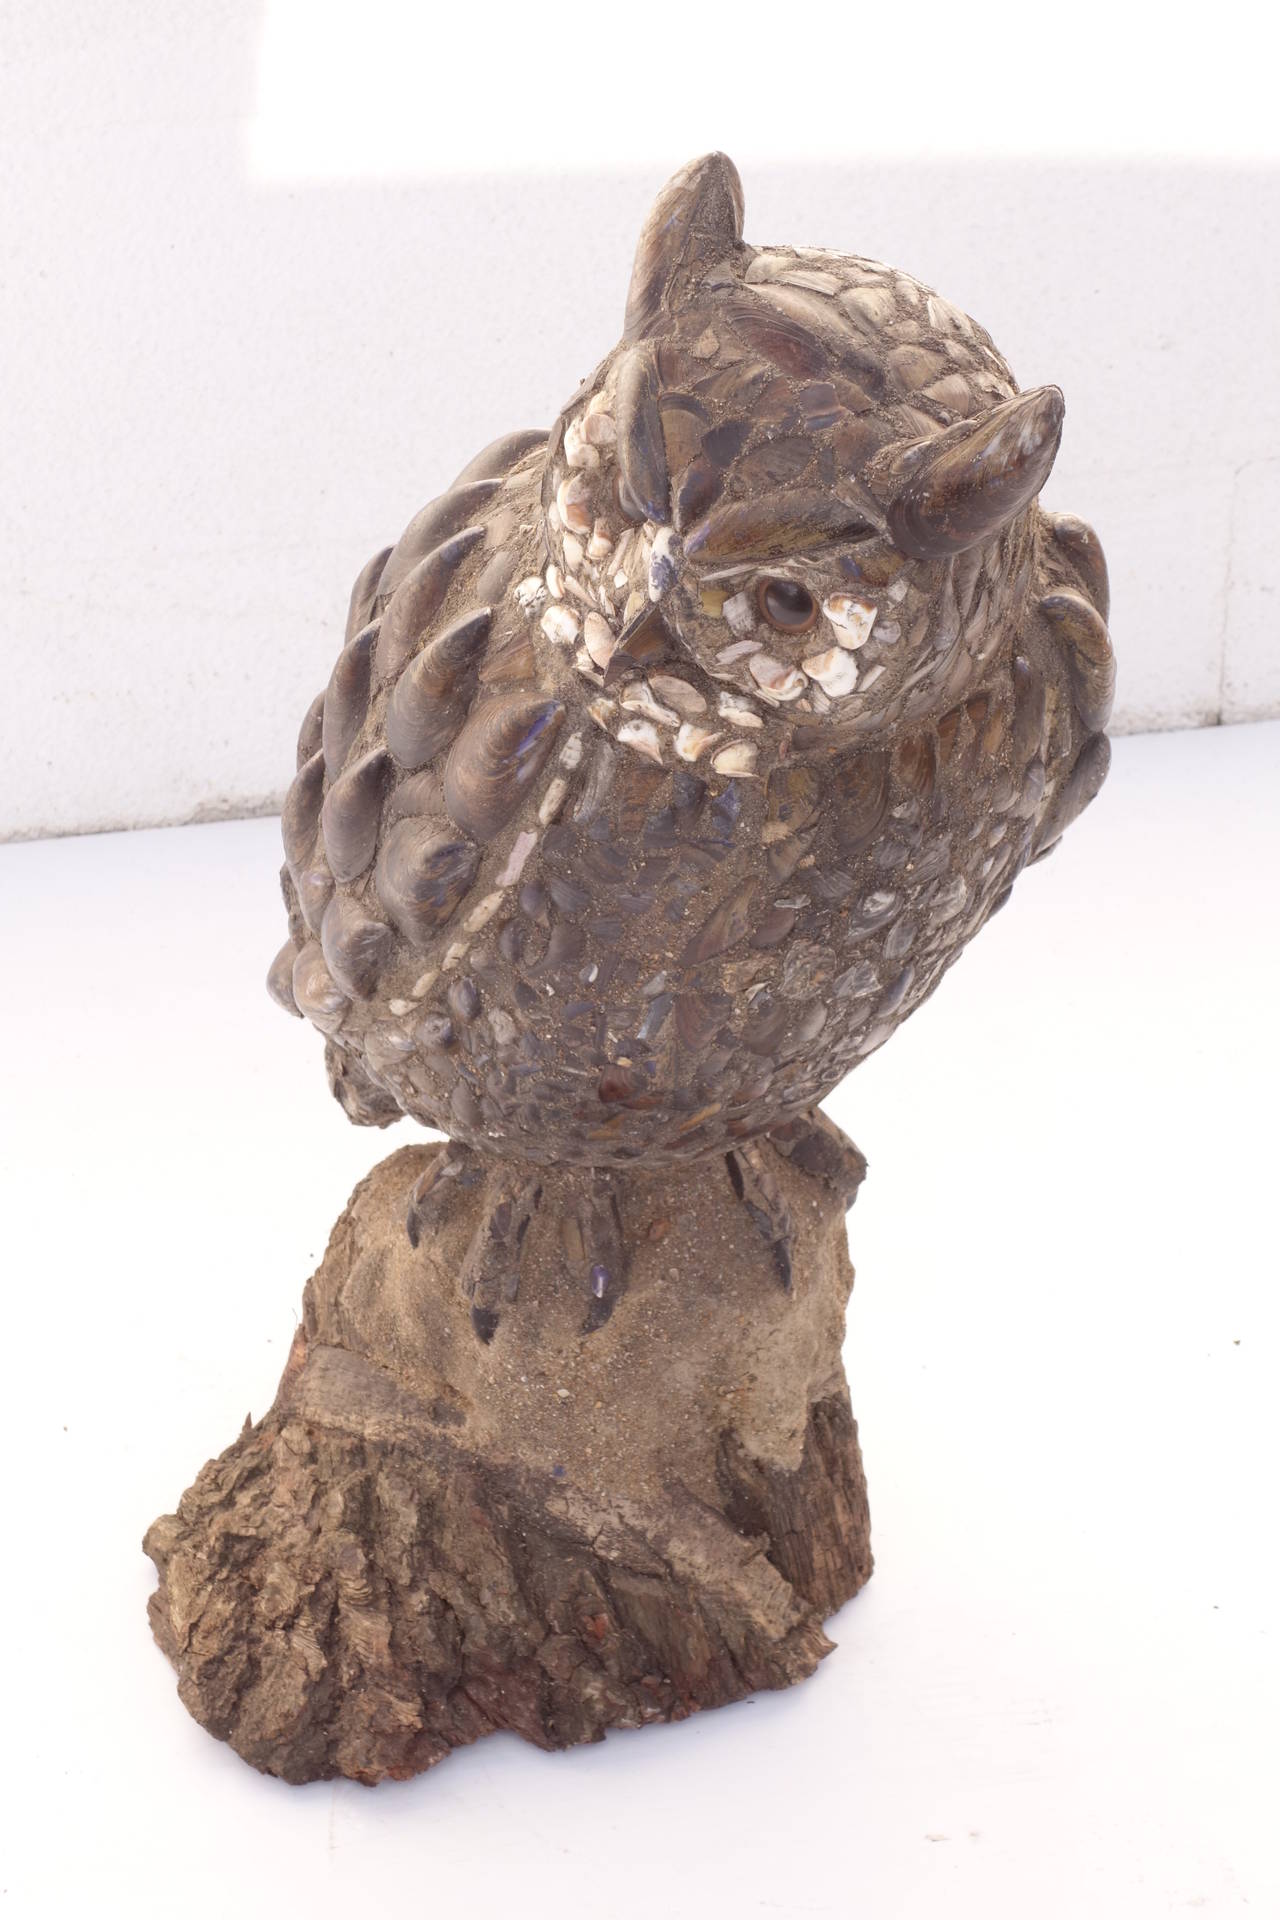 Folk art owl sculpture made from mussel shells and sea shells, made in England, one of a kind. Hand-made by artist. 11